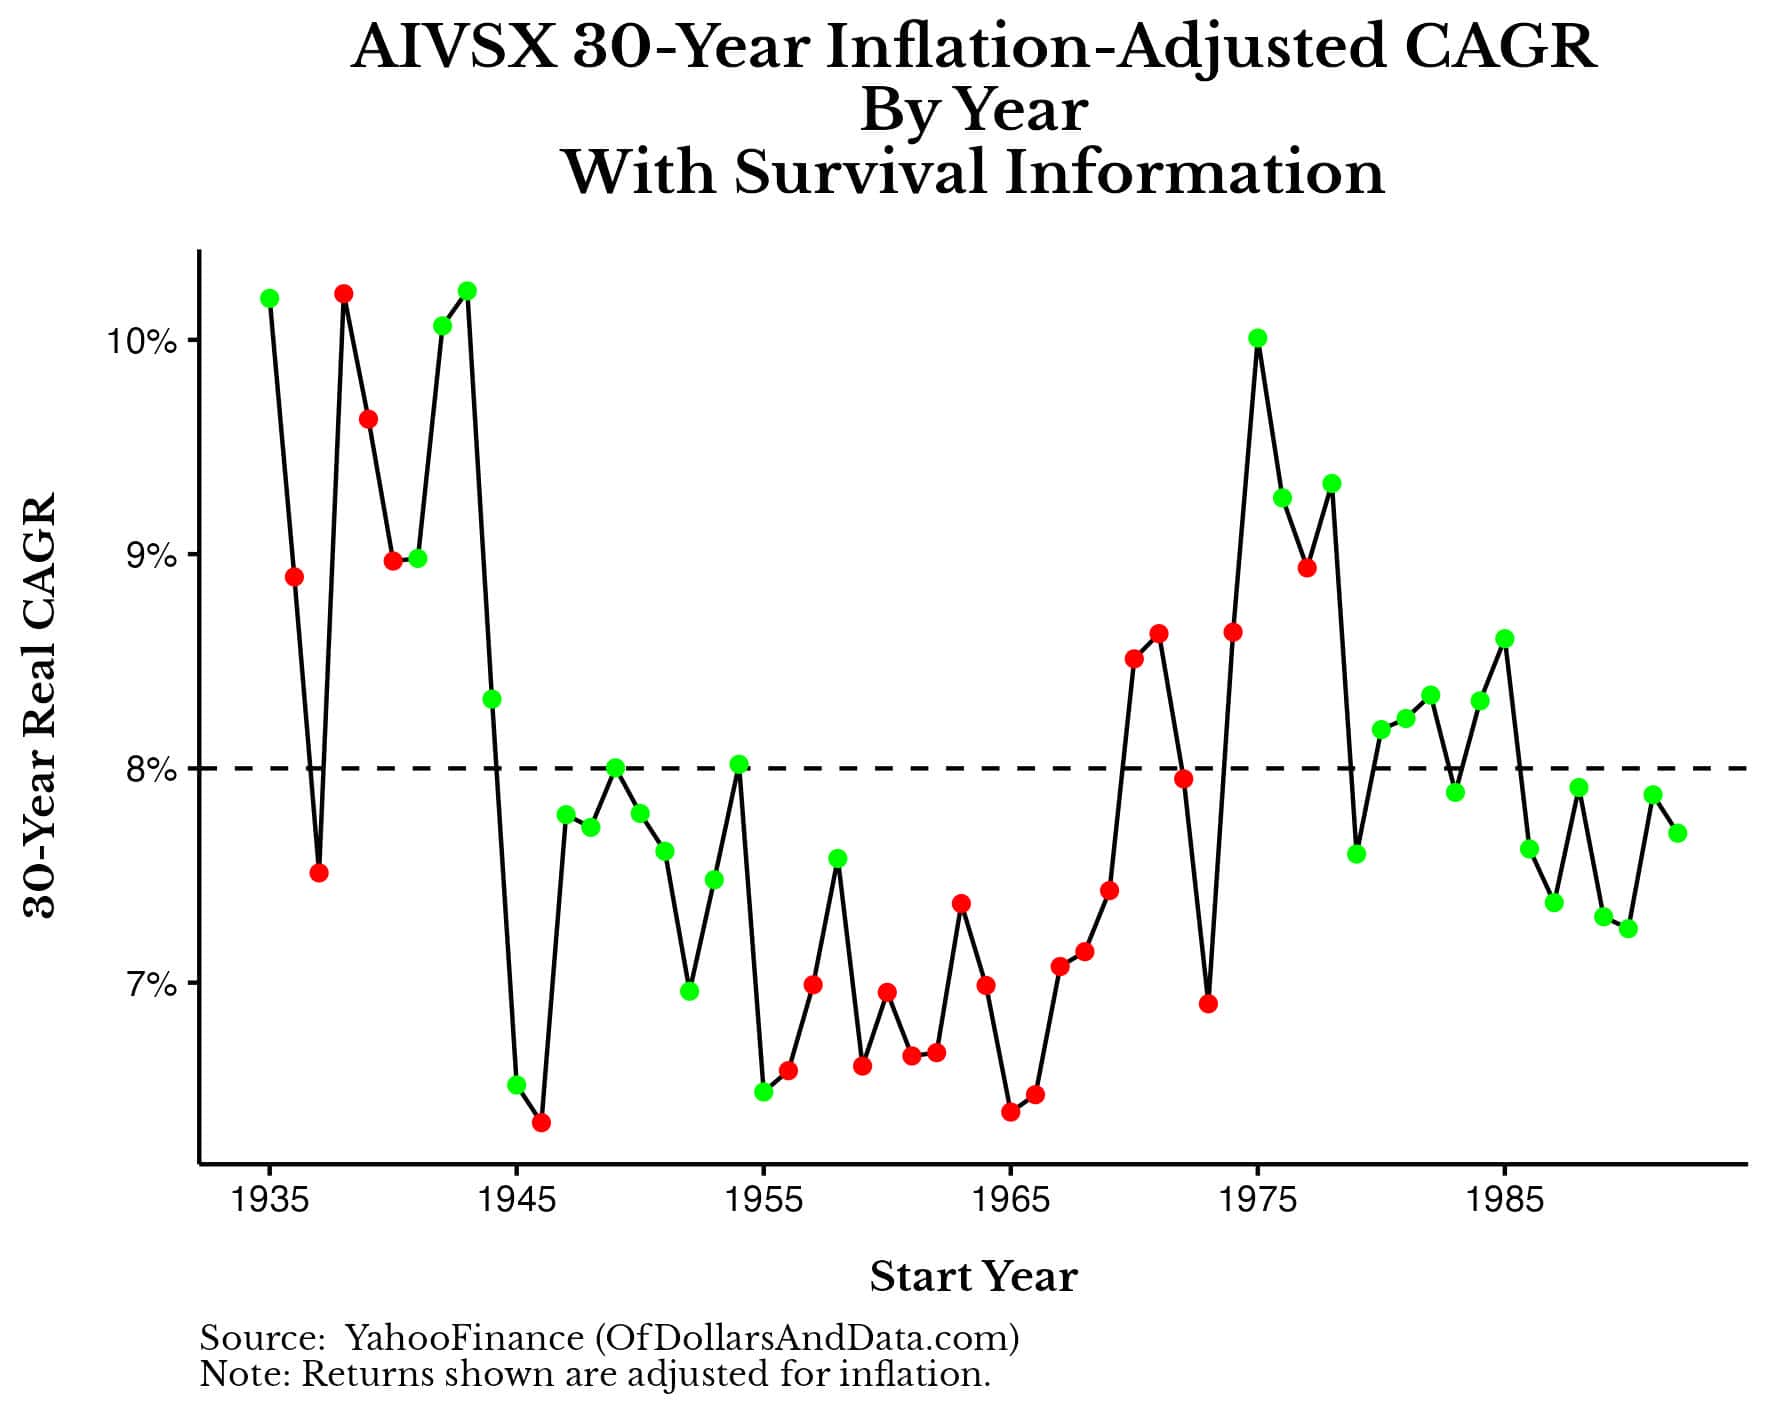 Forward returns of AIVSX over 30 years by start year with survival information based on an 8% withdrawal rate.